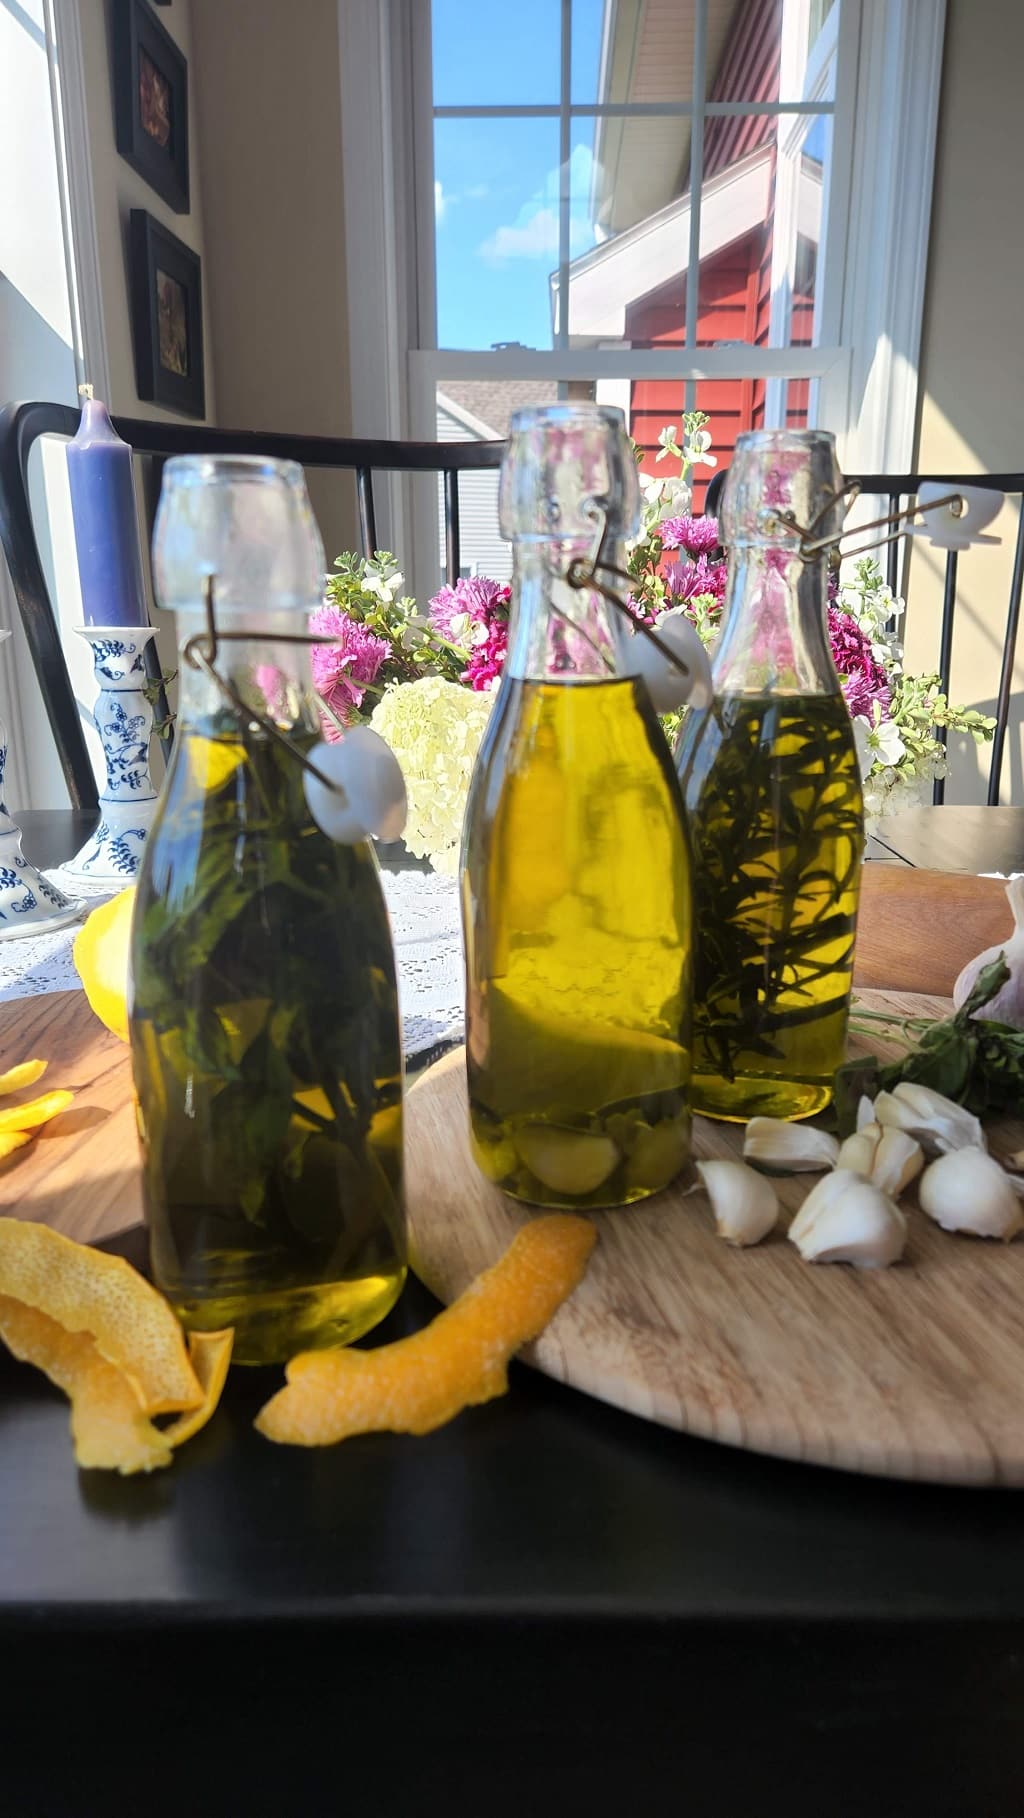 How to Make Homemade Garlic Infused Olive Oil